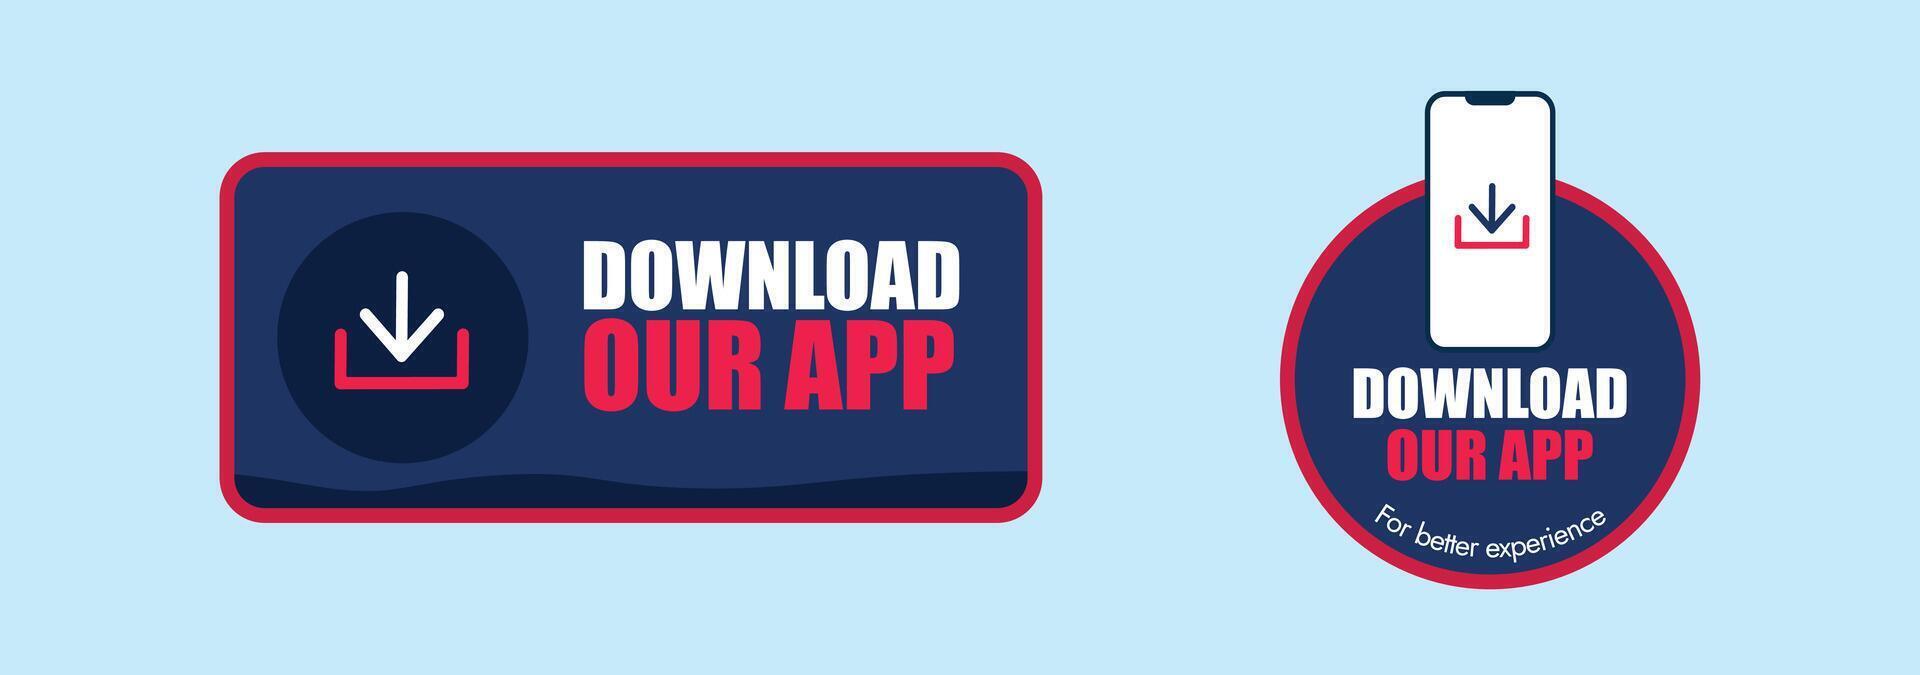 Download the app now. Download the app now labels, badges, tags, icons, stickers design in two different shapes with download button. For better experience download the app now. vector